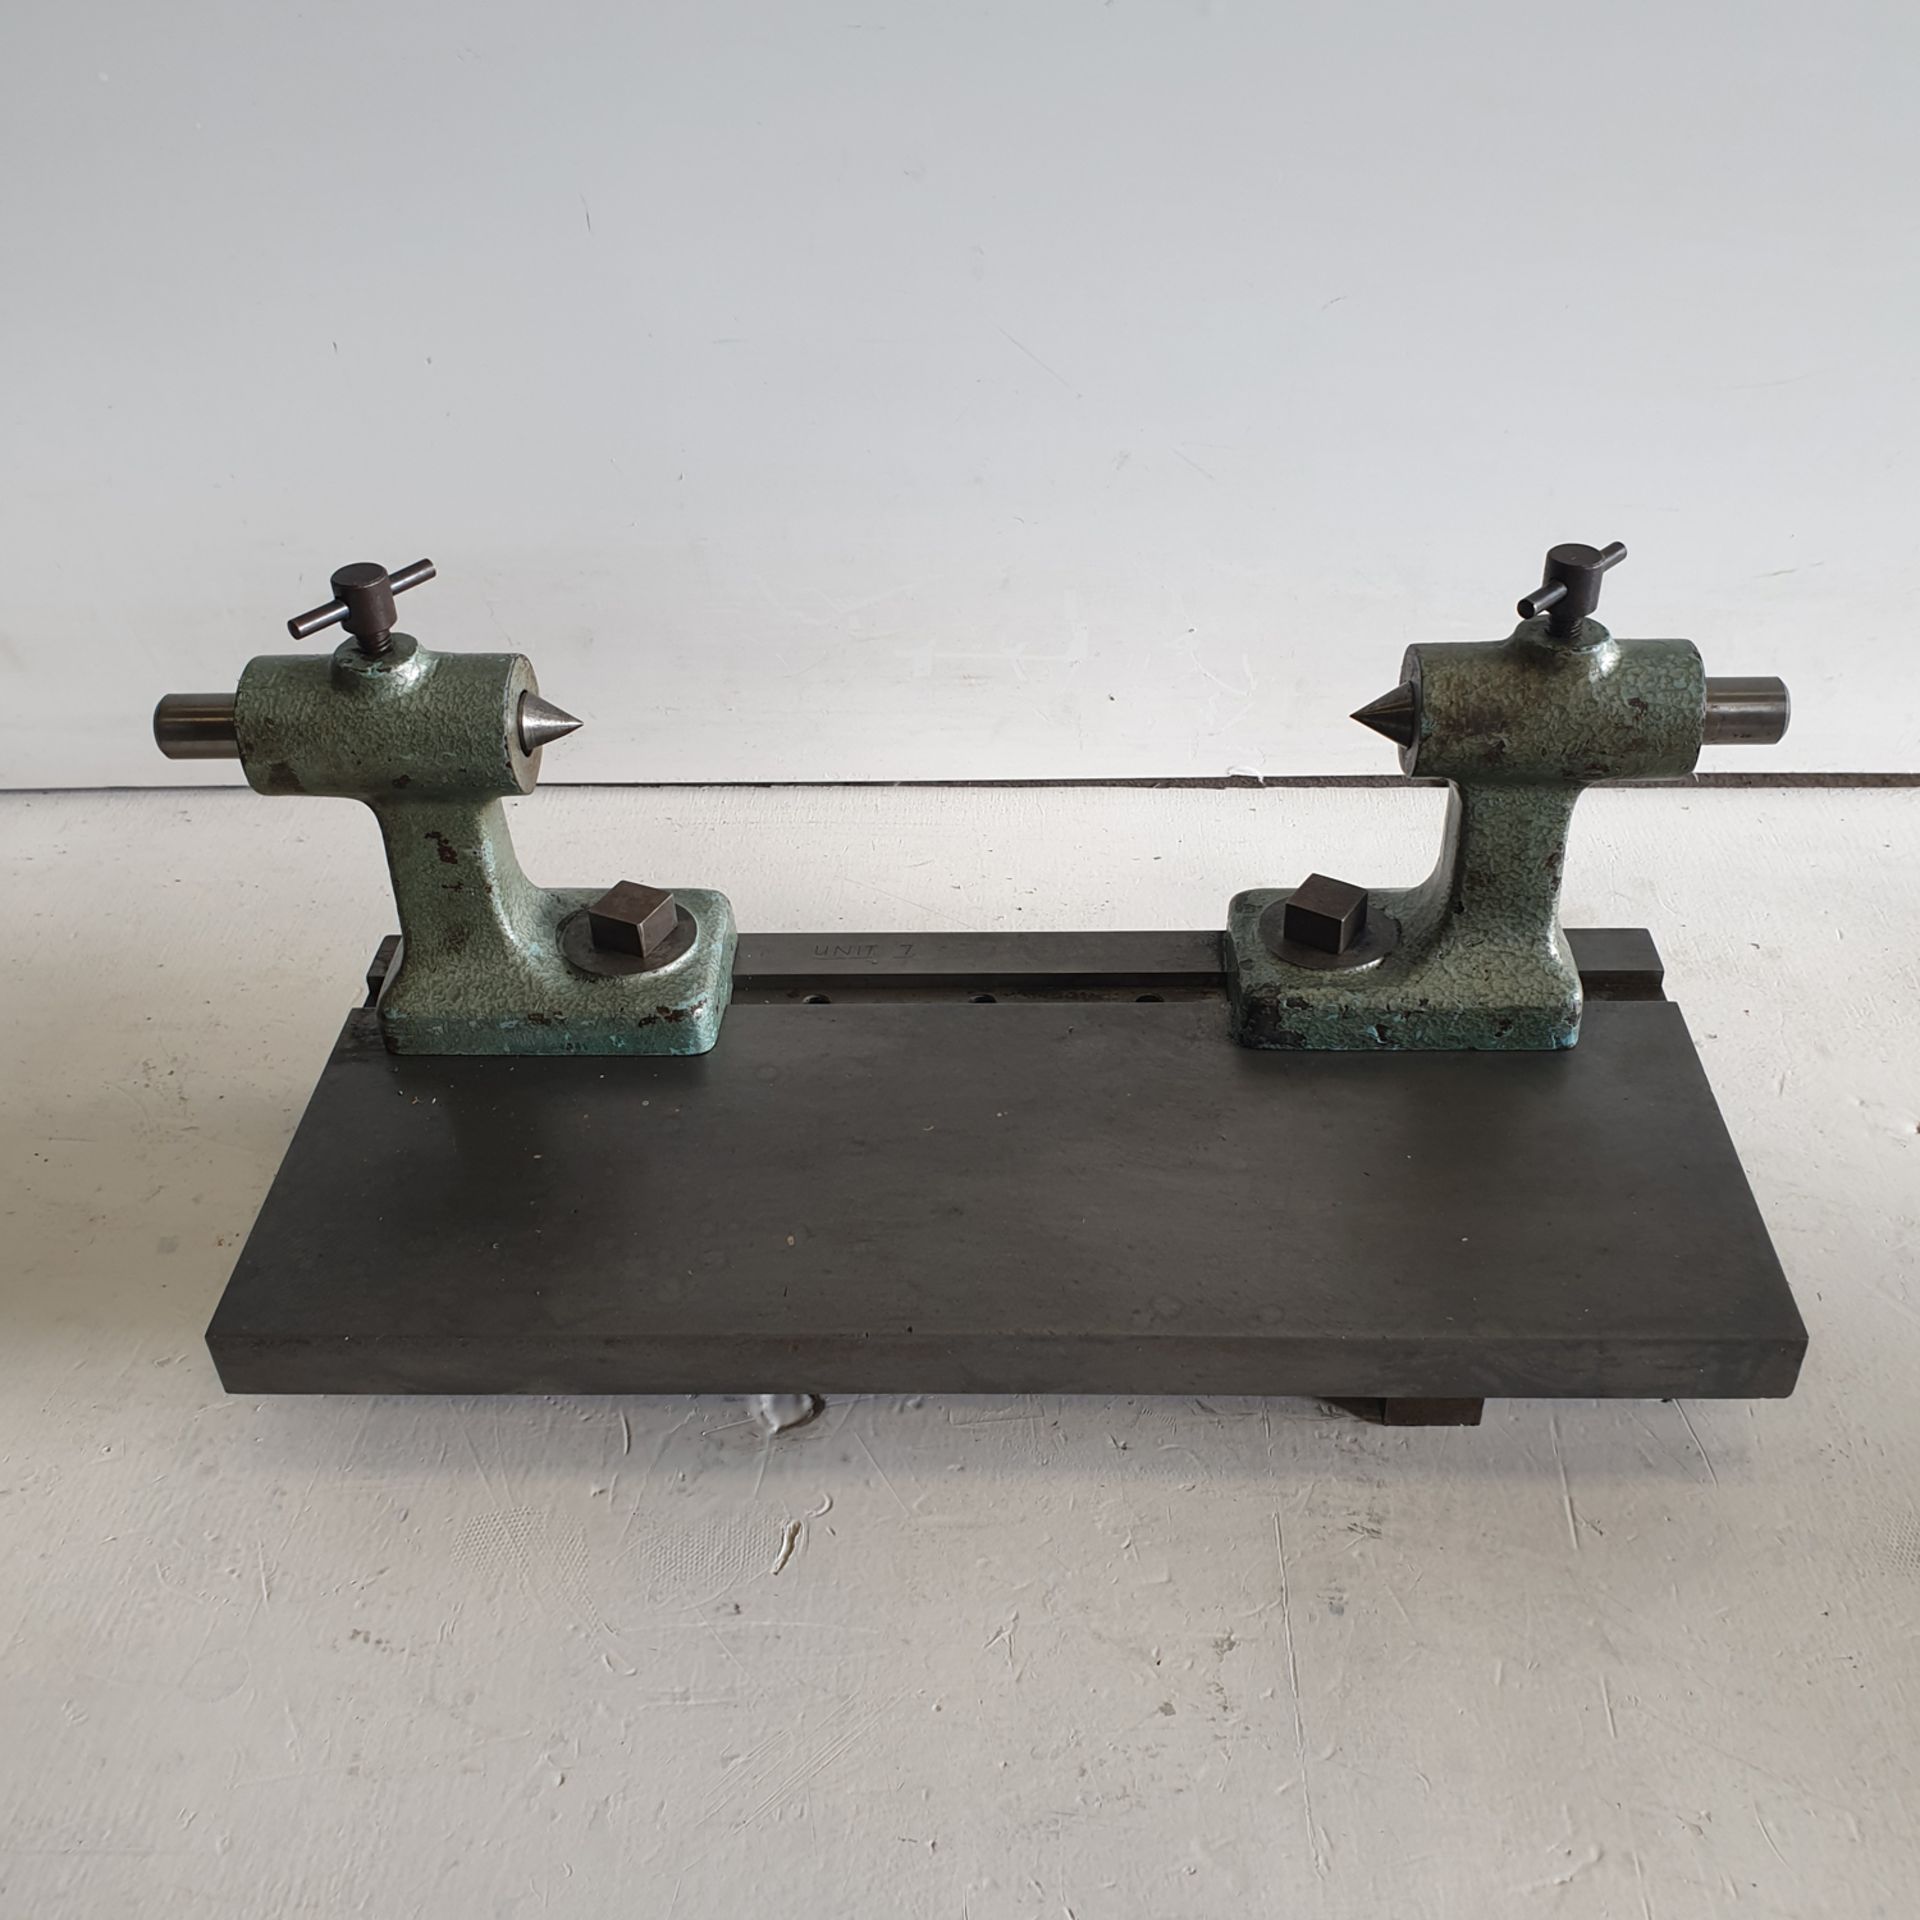 Pair of Centres on Steel Base. Centre Height 80mm. Max Capacity 270mm Approx. - Image 6 of 7